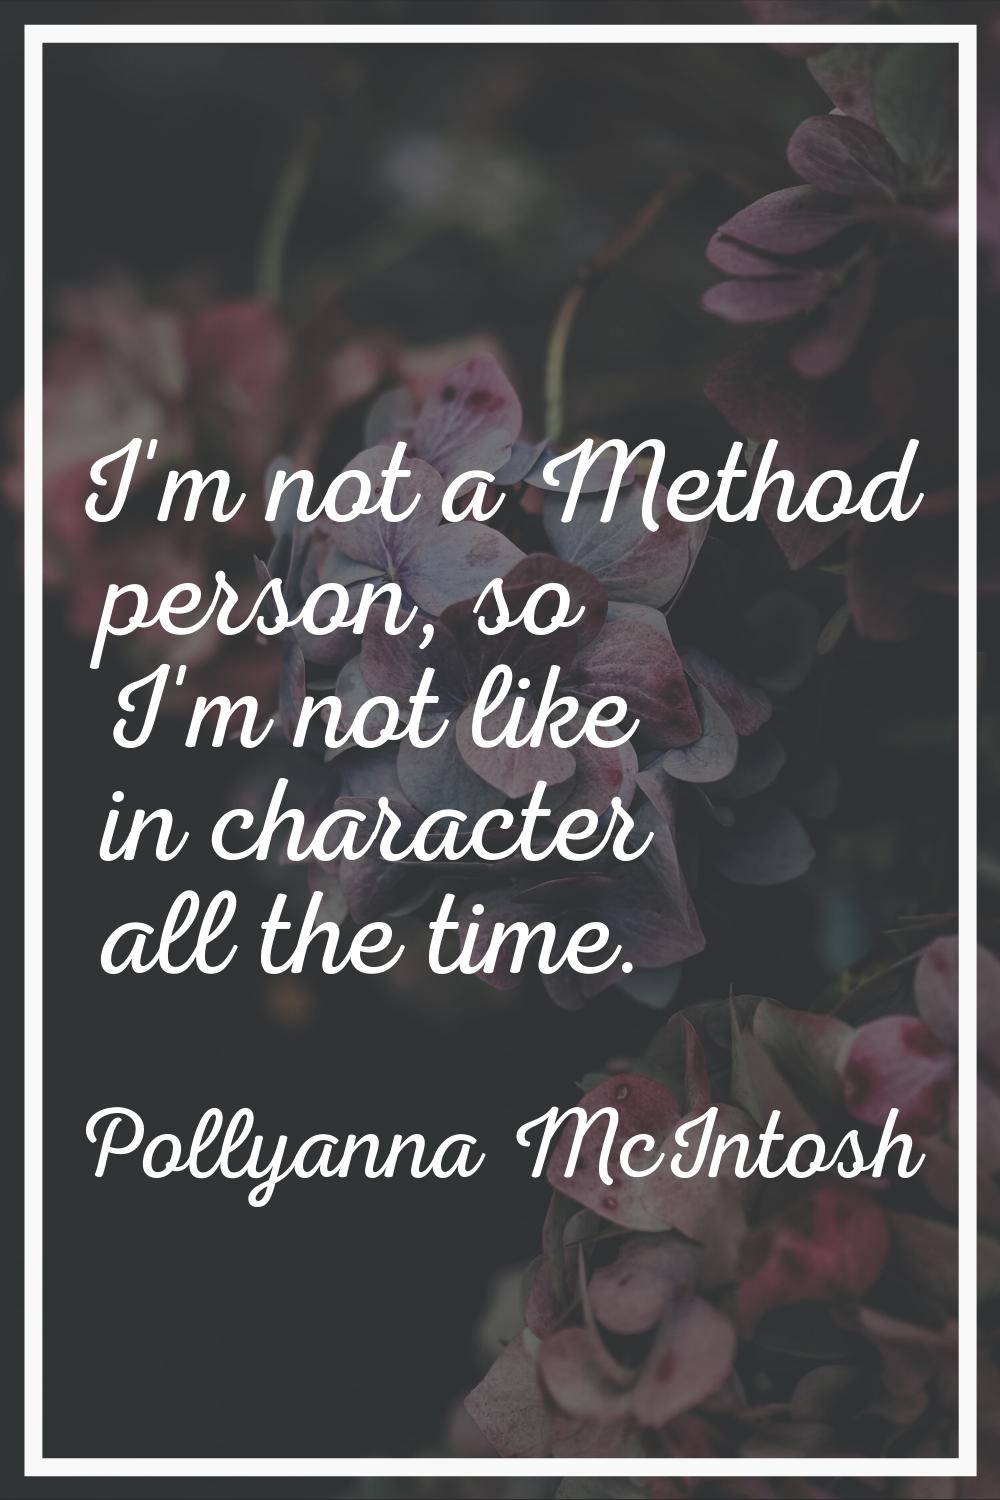 I'm not a Method person, so I'm not like in character all the time.